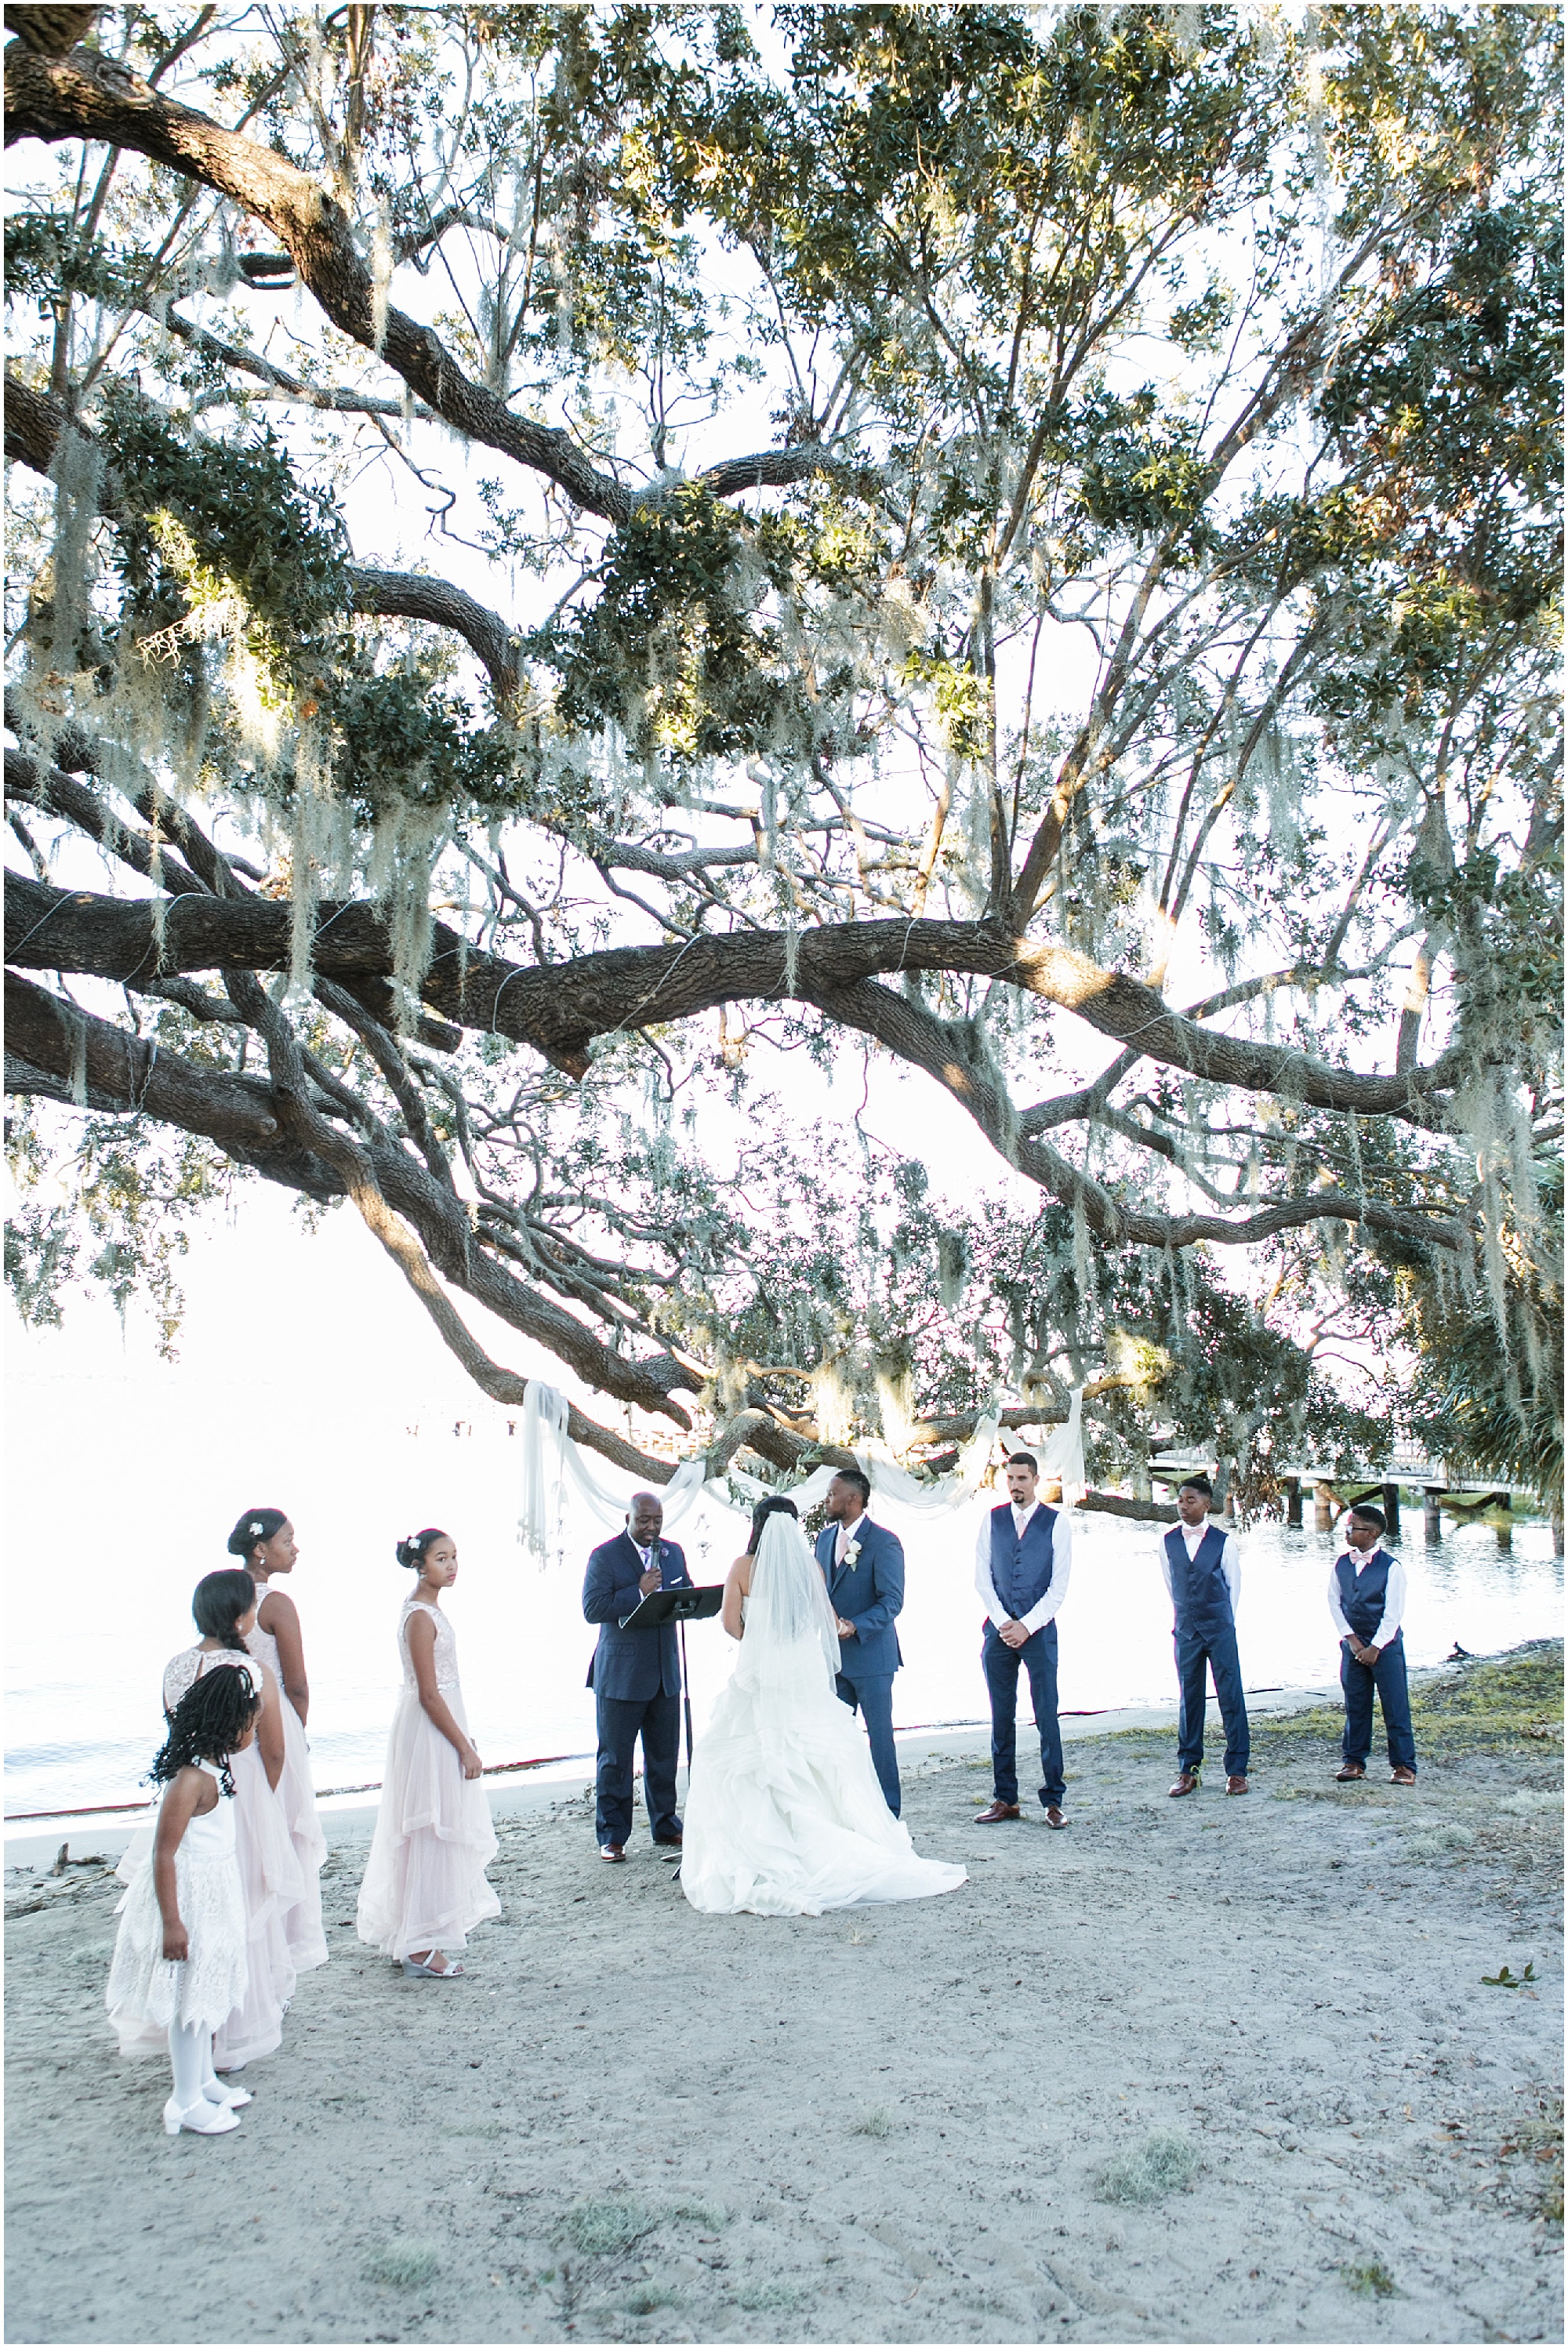 Photo of a wedding taking place under a large oak tree on the lakeshore. 